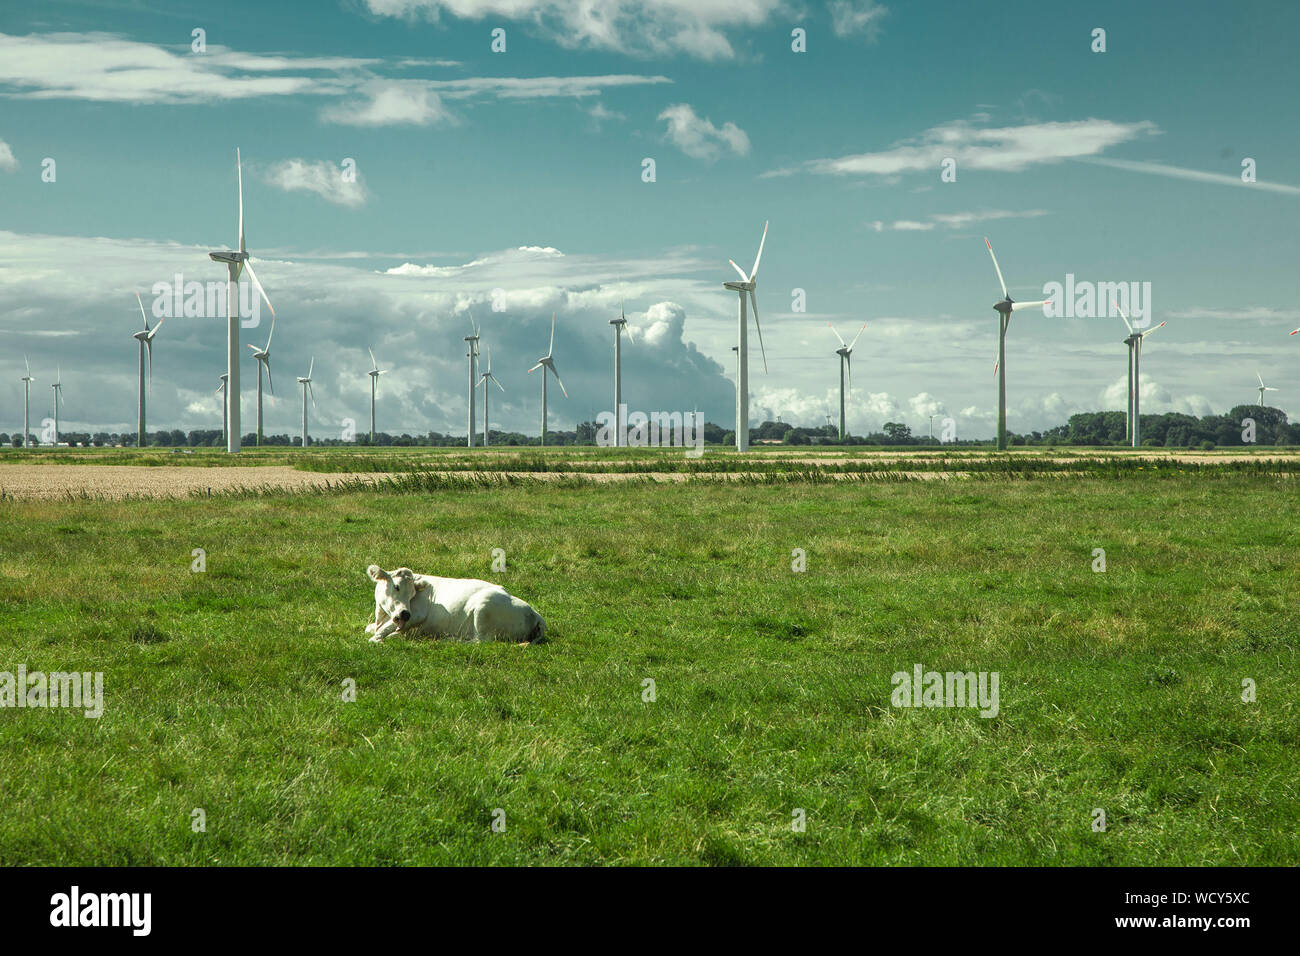 Cow Sitting On Grassy Field By Windmills Against Cloudy Sky Stock Photo